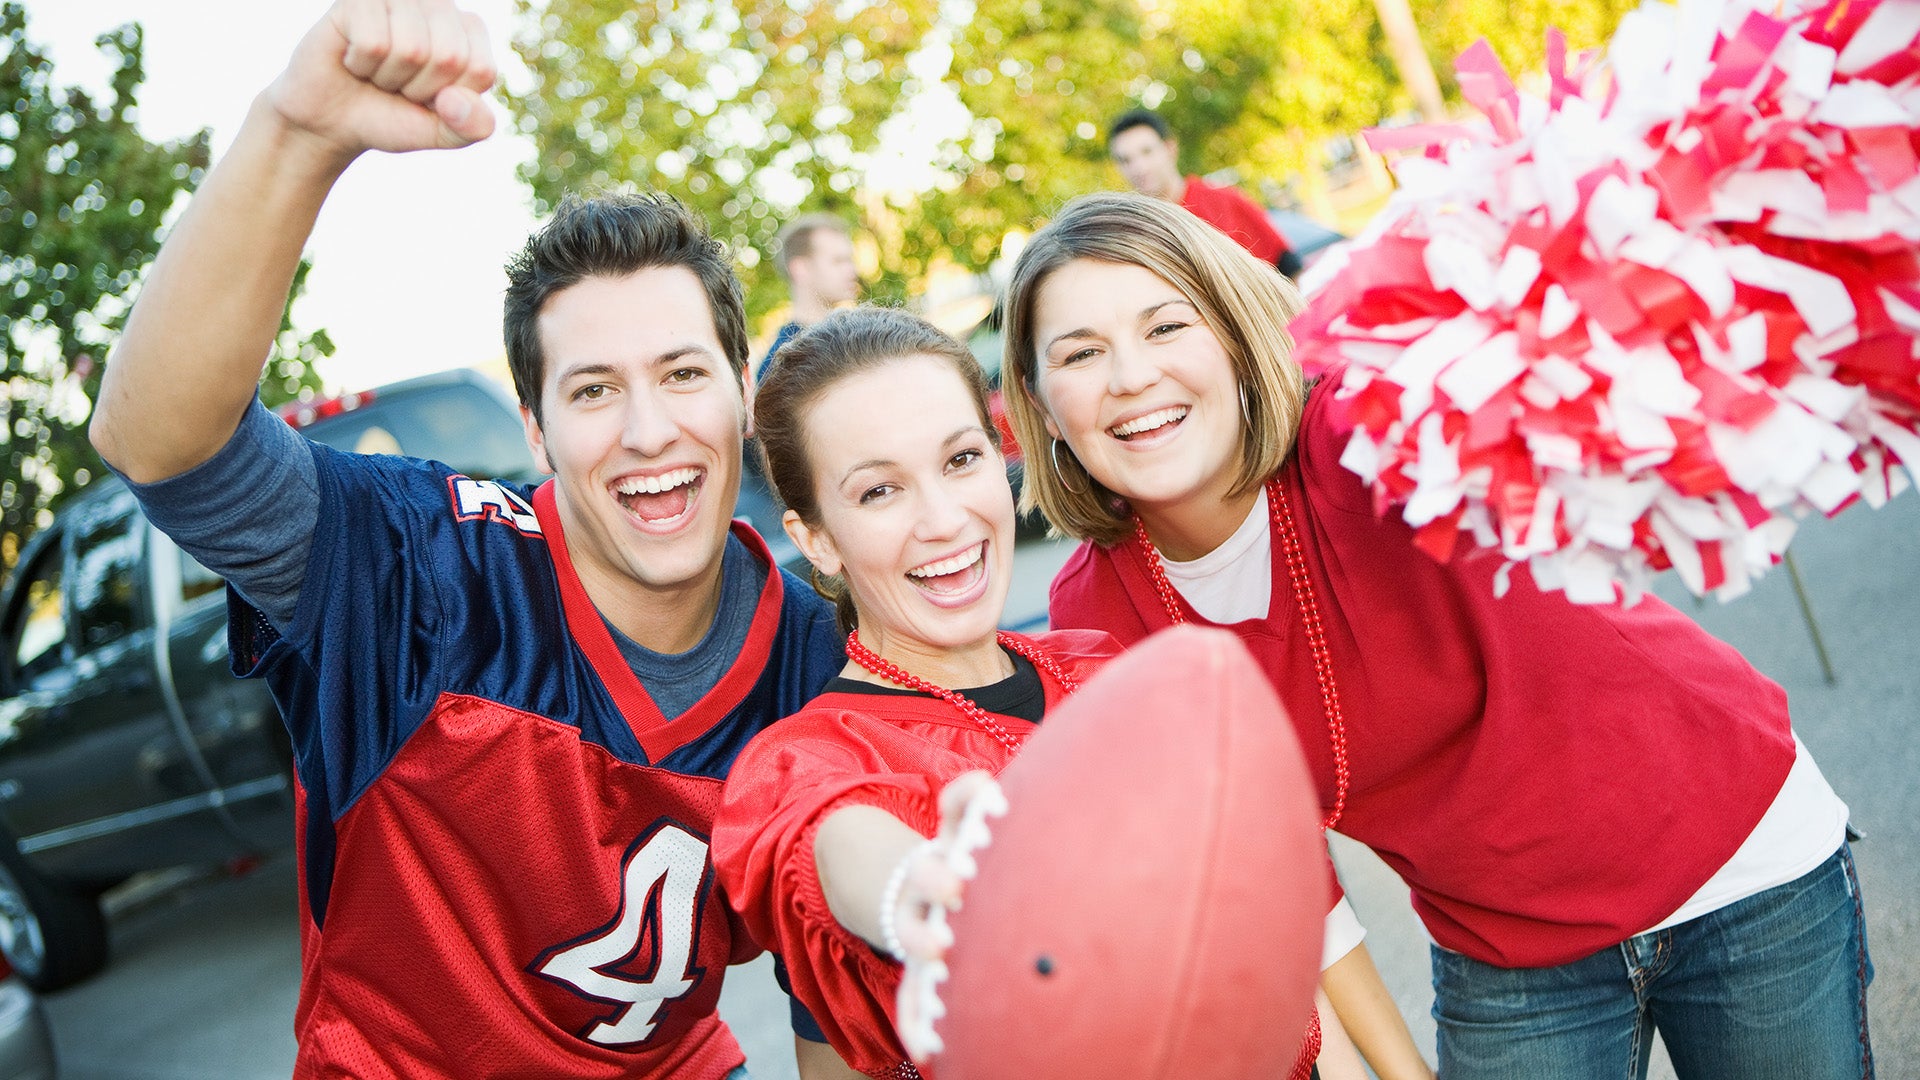 7 Safety Tips for a Terrific Tailgating Experience